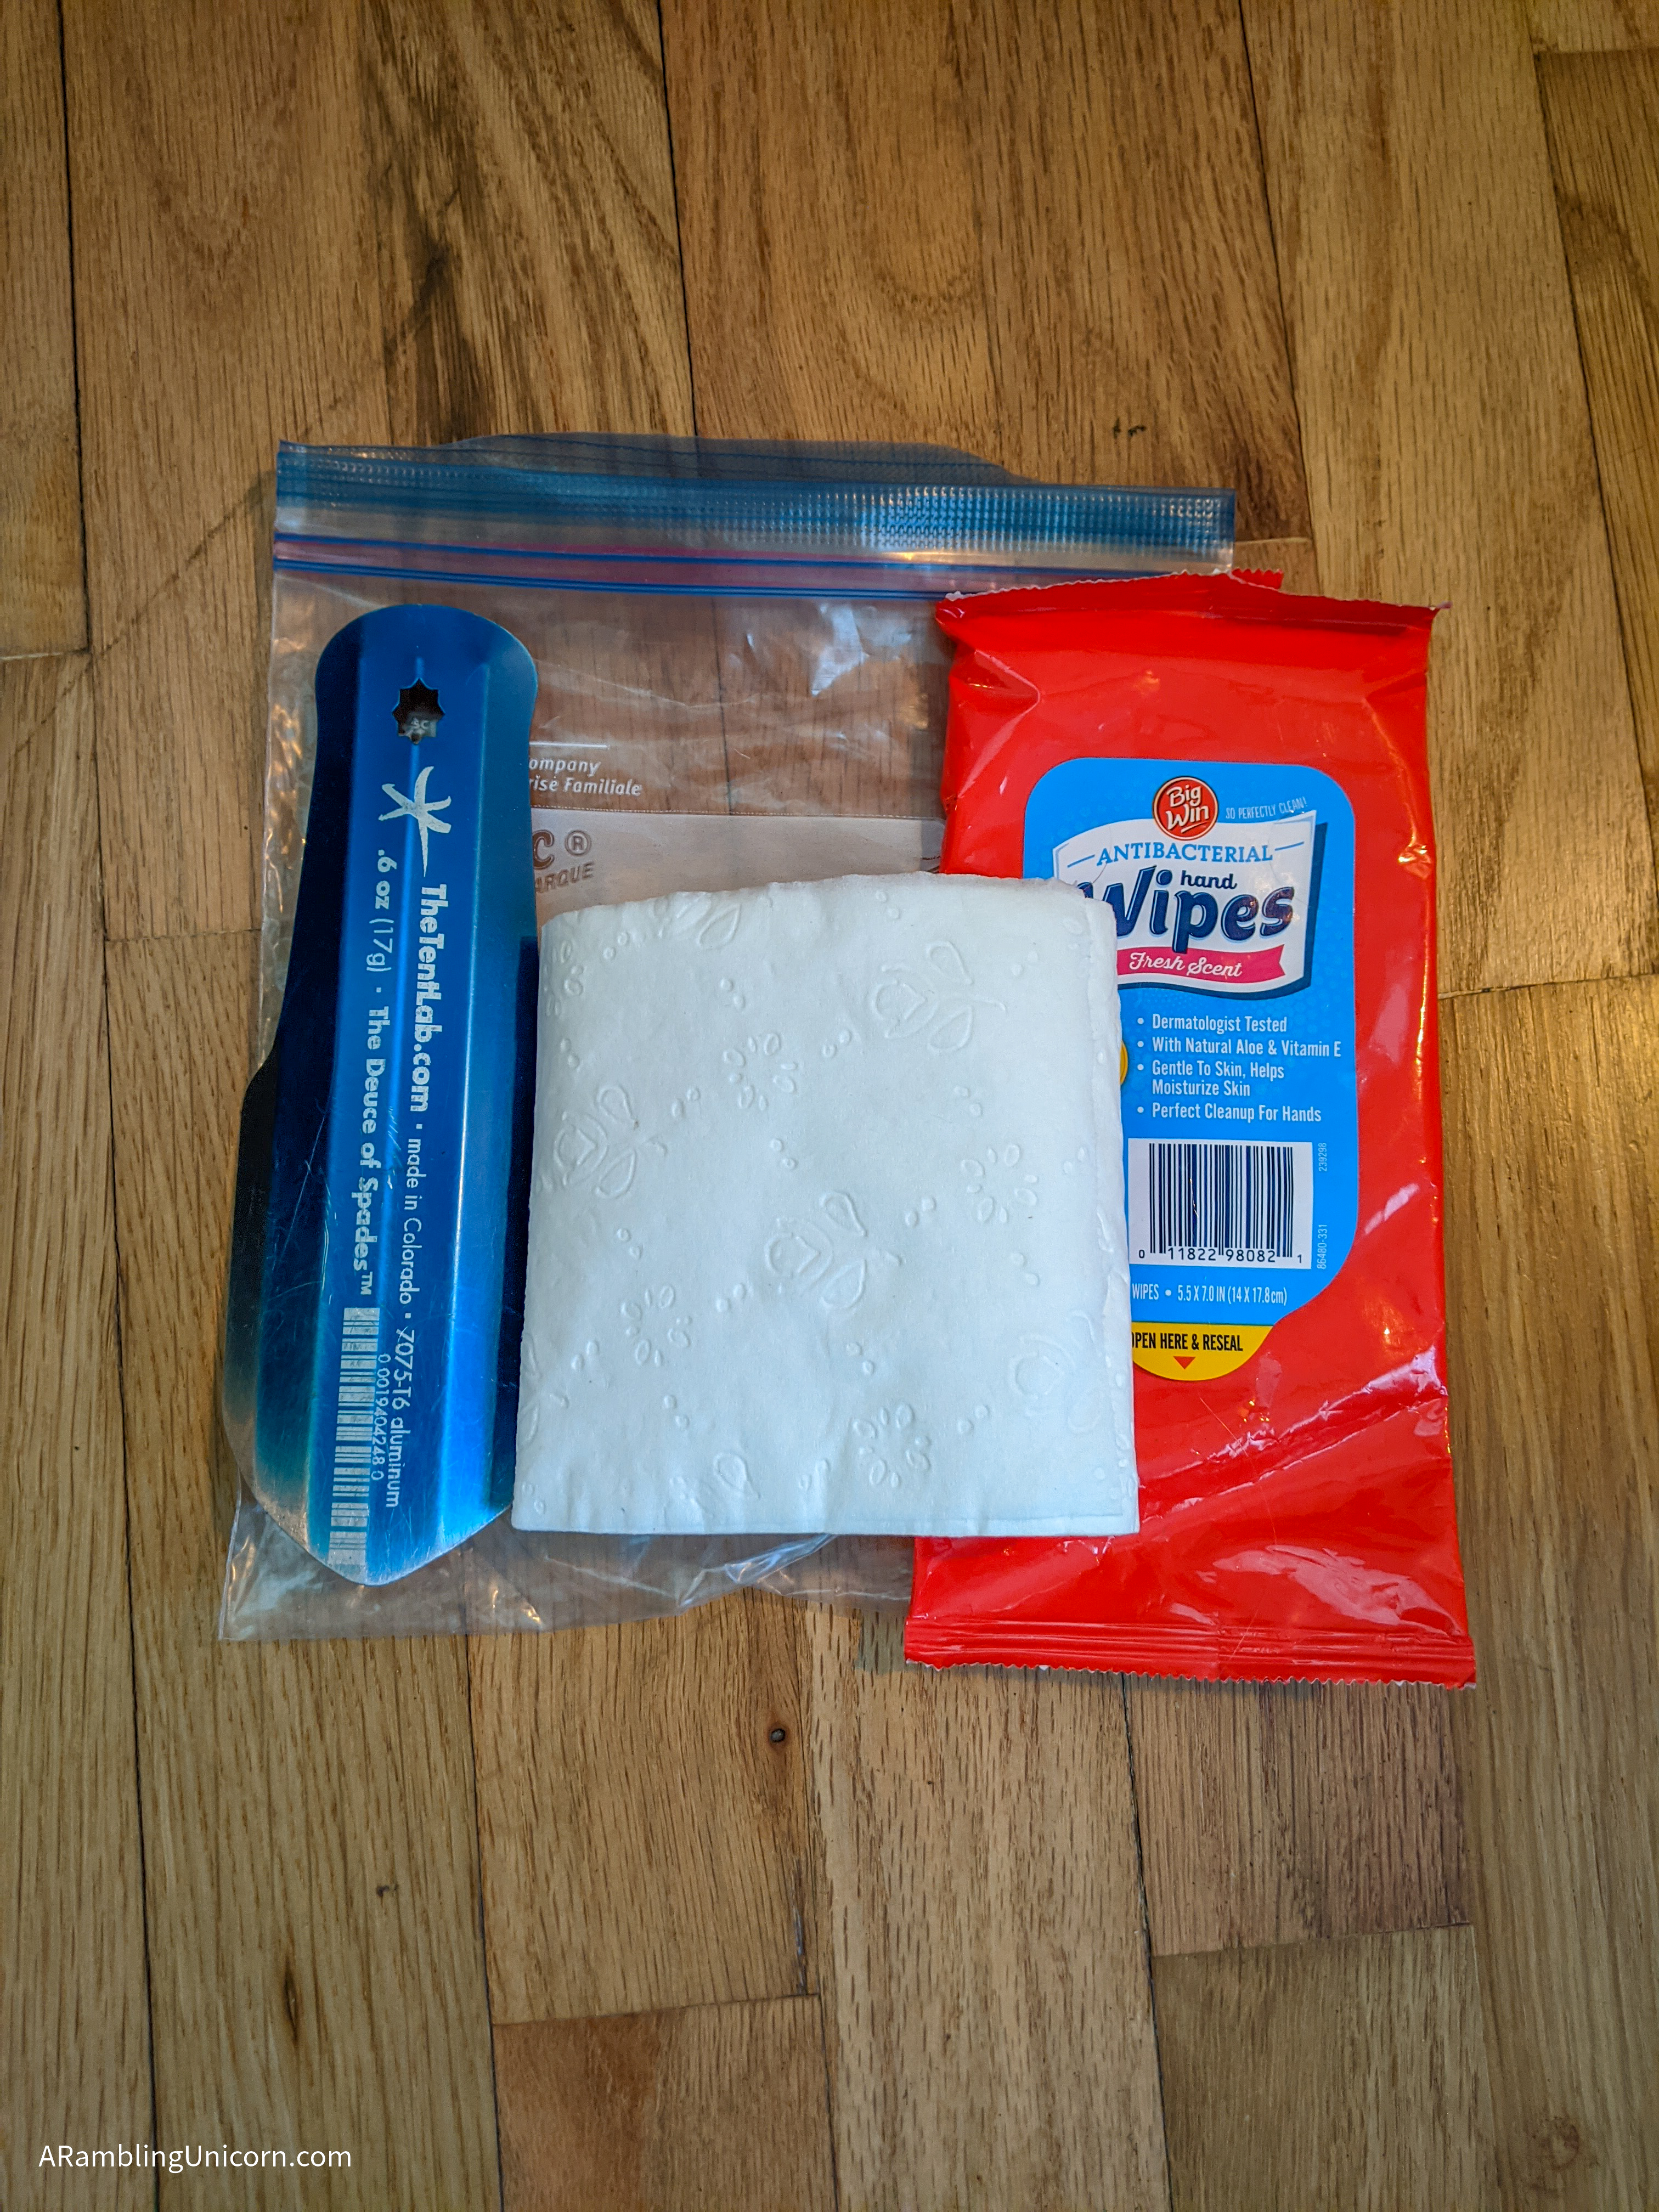 A lightweight trowel, roll of toilet paper and wipes along with a quart-sized Ziploc baggie.